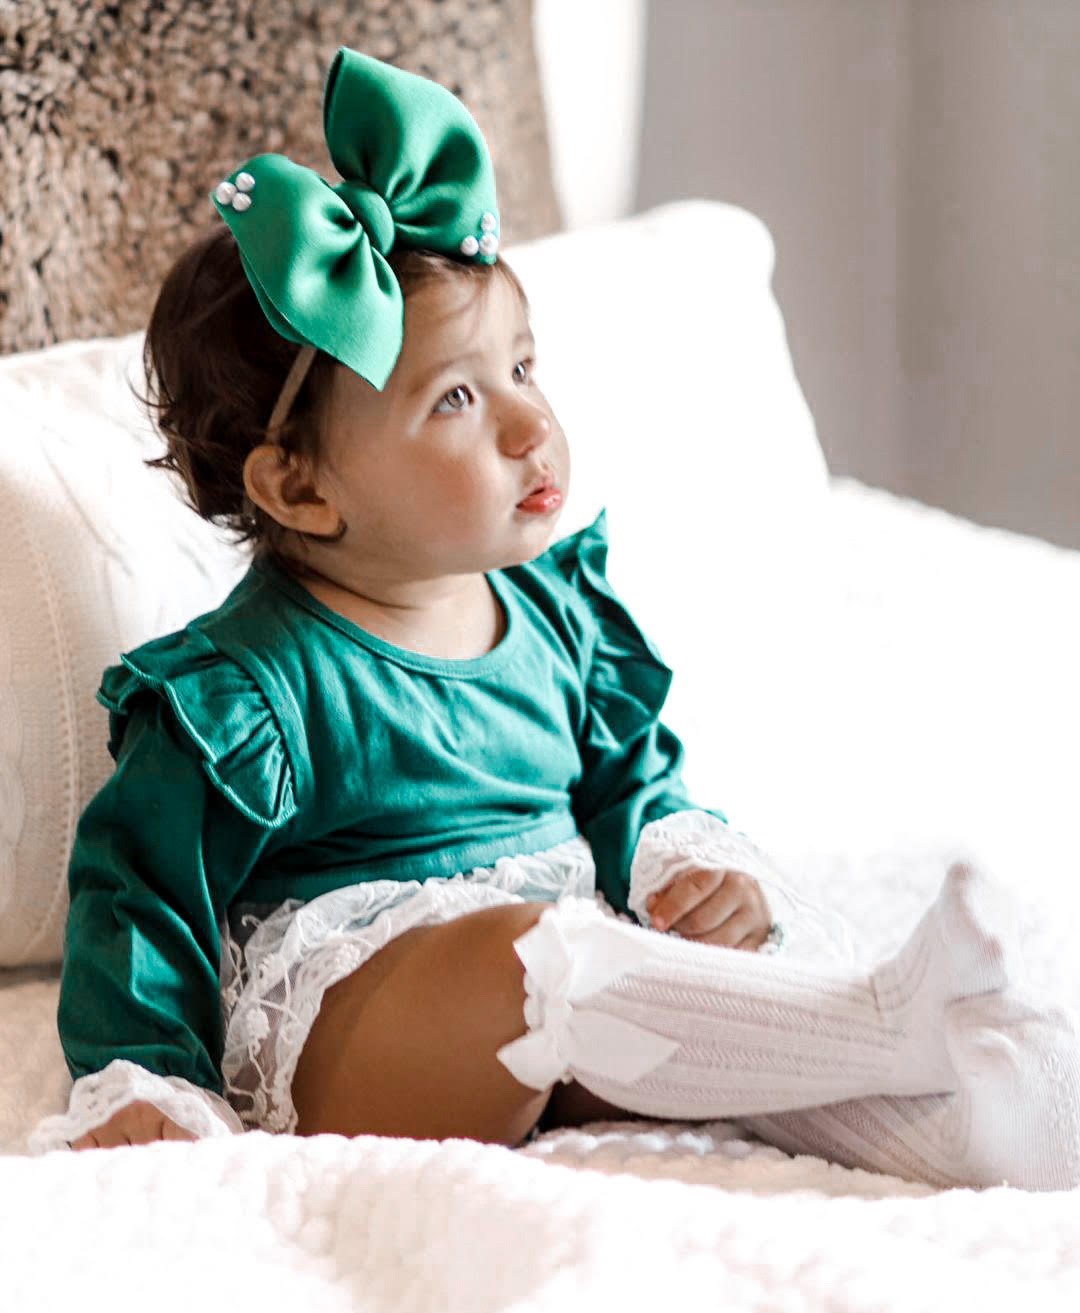 child wearing the Baby Girl Vintage Lace Green Lace Skirted Romper. Also wearing a green bow & button headband, as well as white knee high socks.